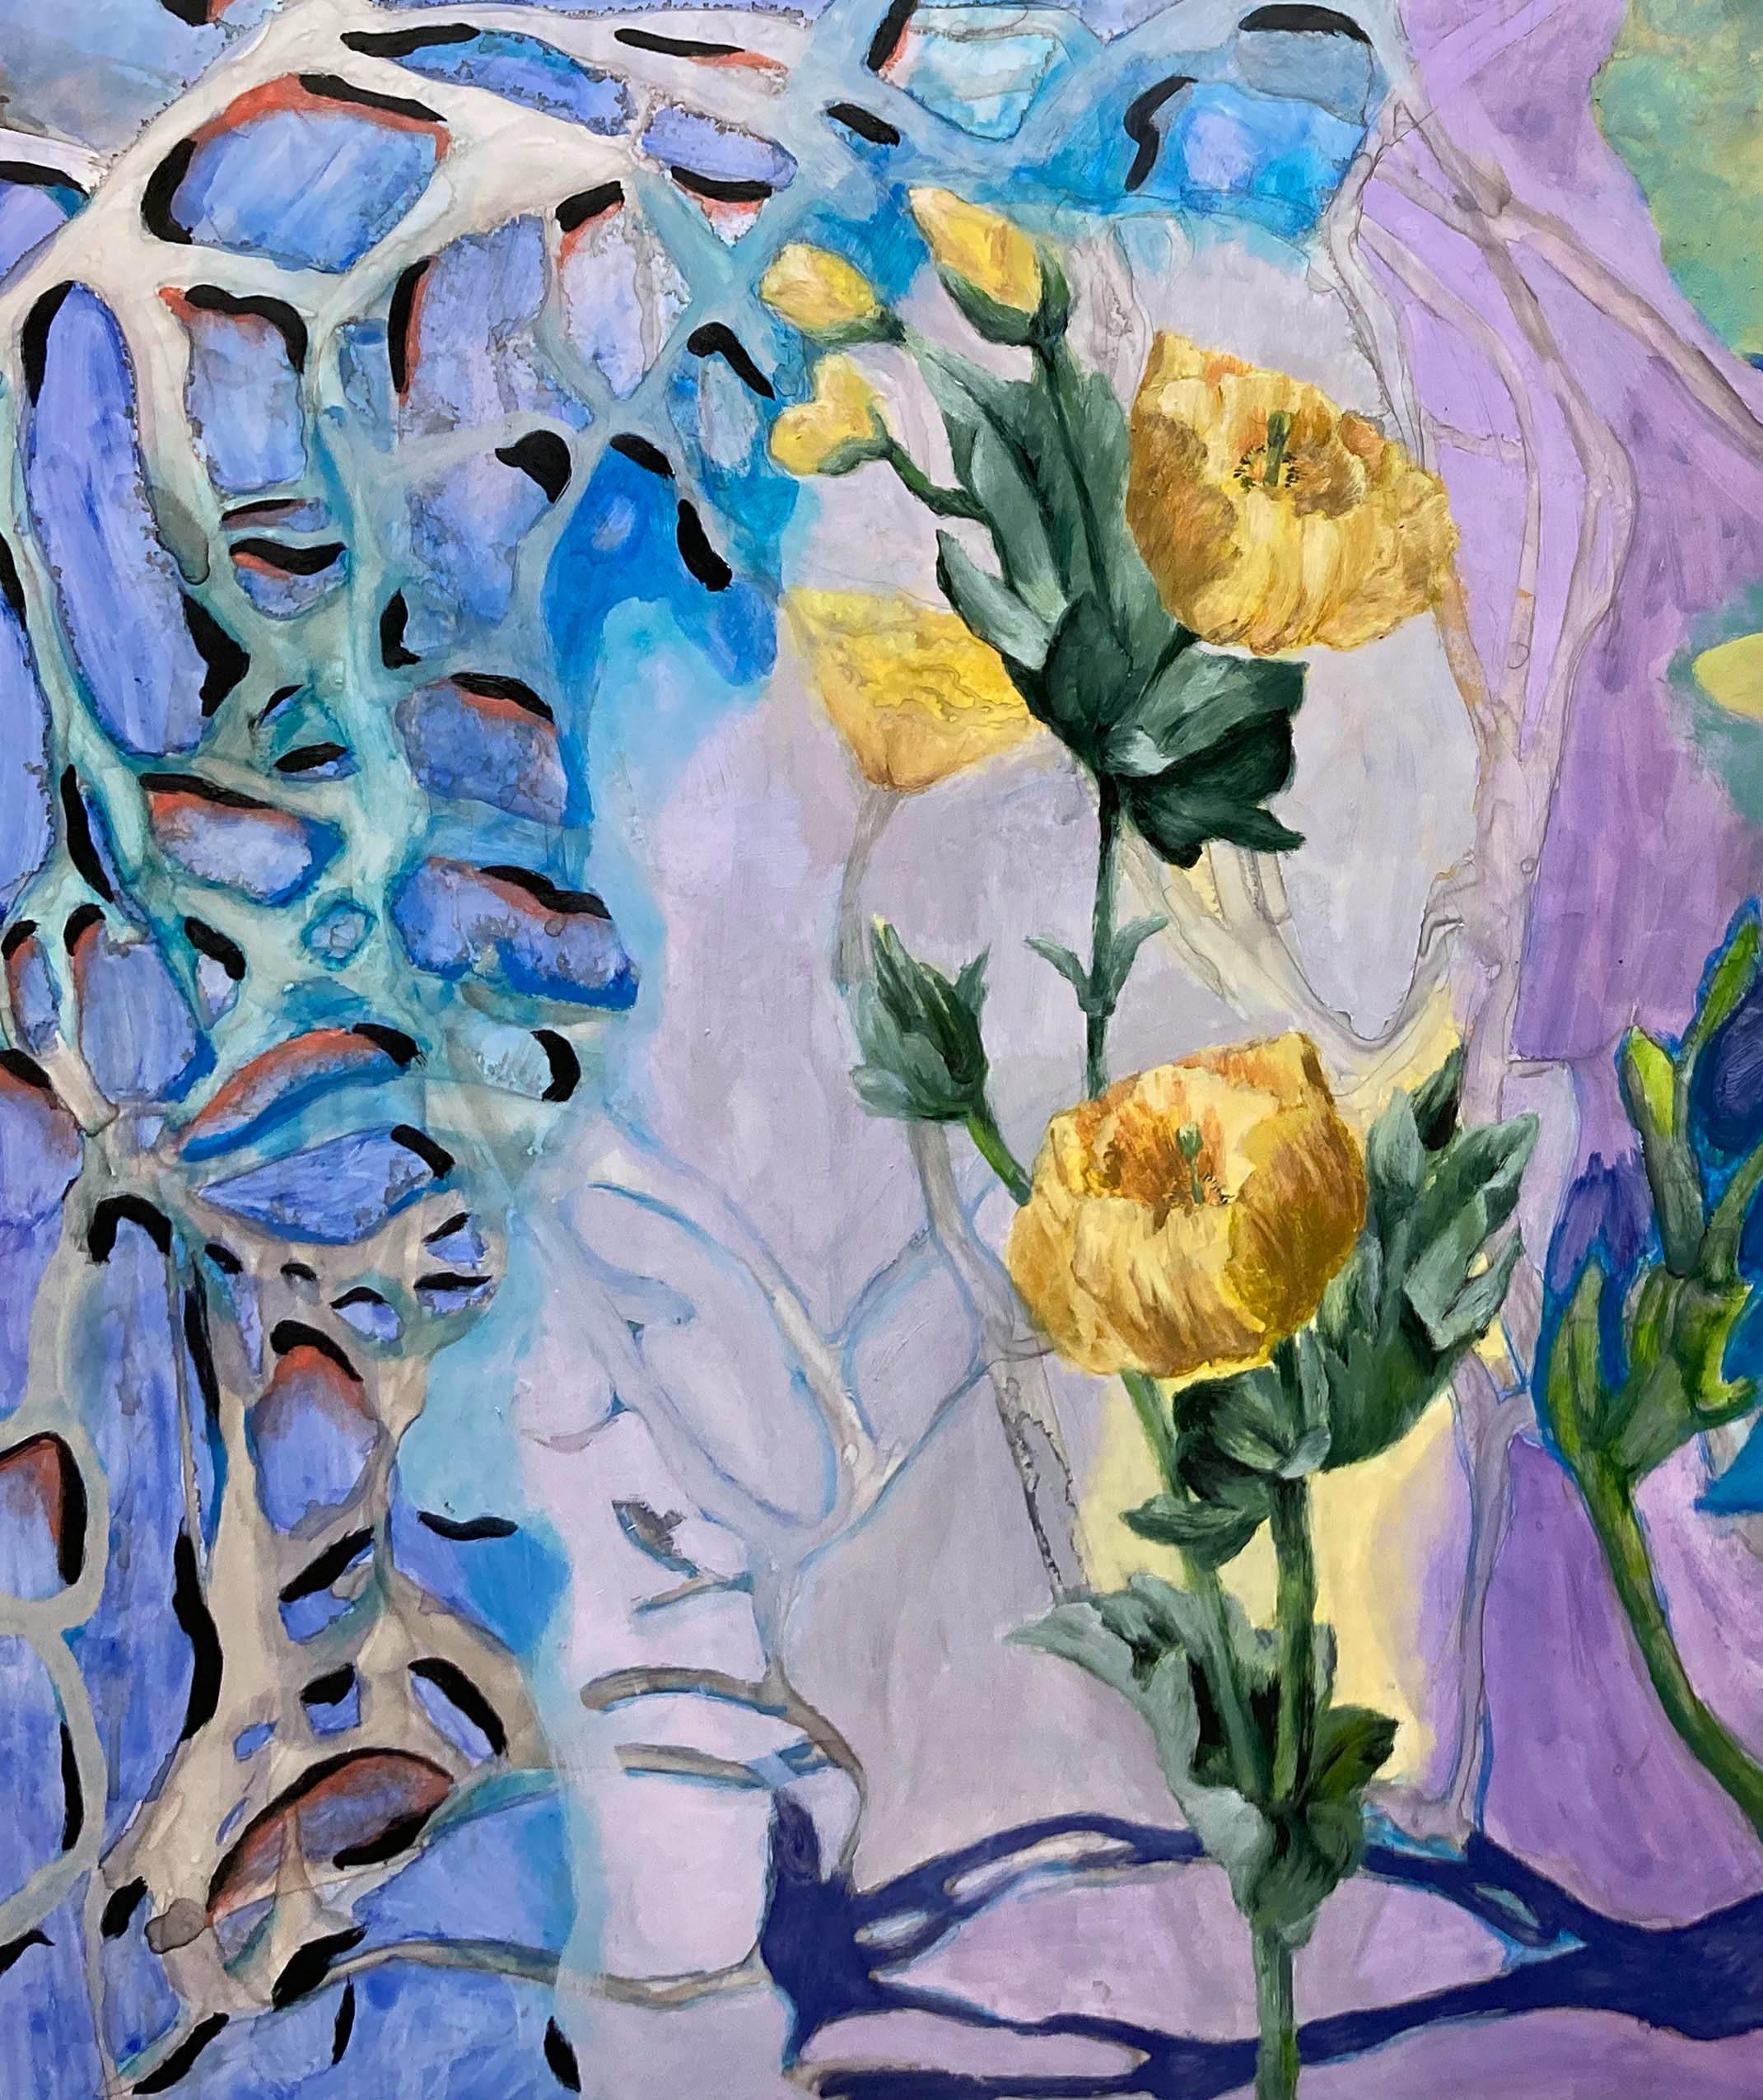 Yellow Poppies by  Texas artist Julie England is an  Ink and  Watercolor, Oil on Yupo paper. The size of Yellow Poppies is  Image  26” x 40” Framed 31 ¼” x 45 ¼”  Yellow Poppies by Julie England is floated in a white 2” depth gallery frame with OP3